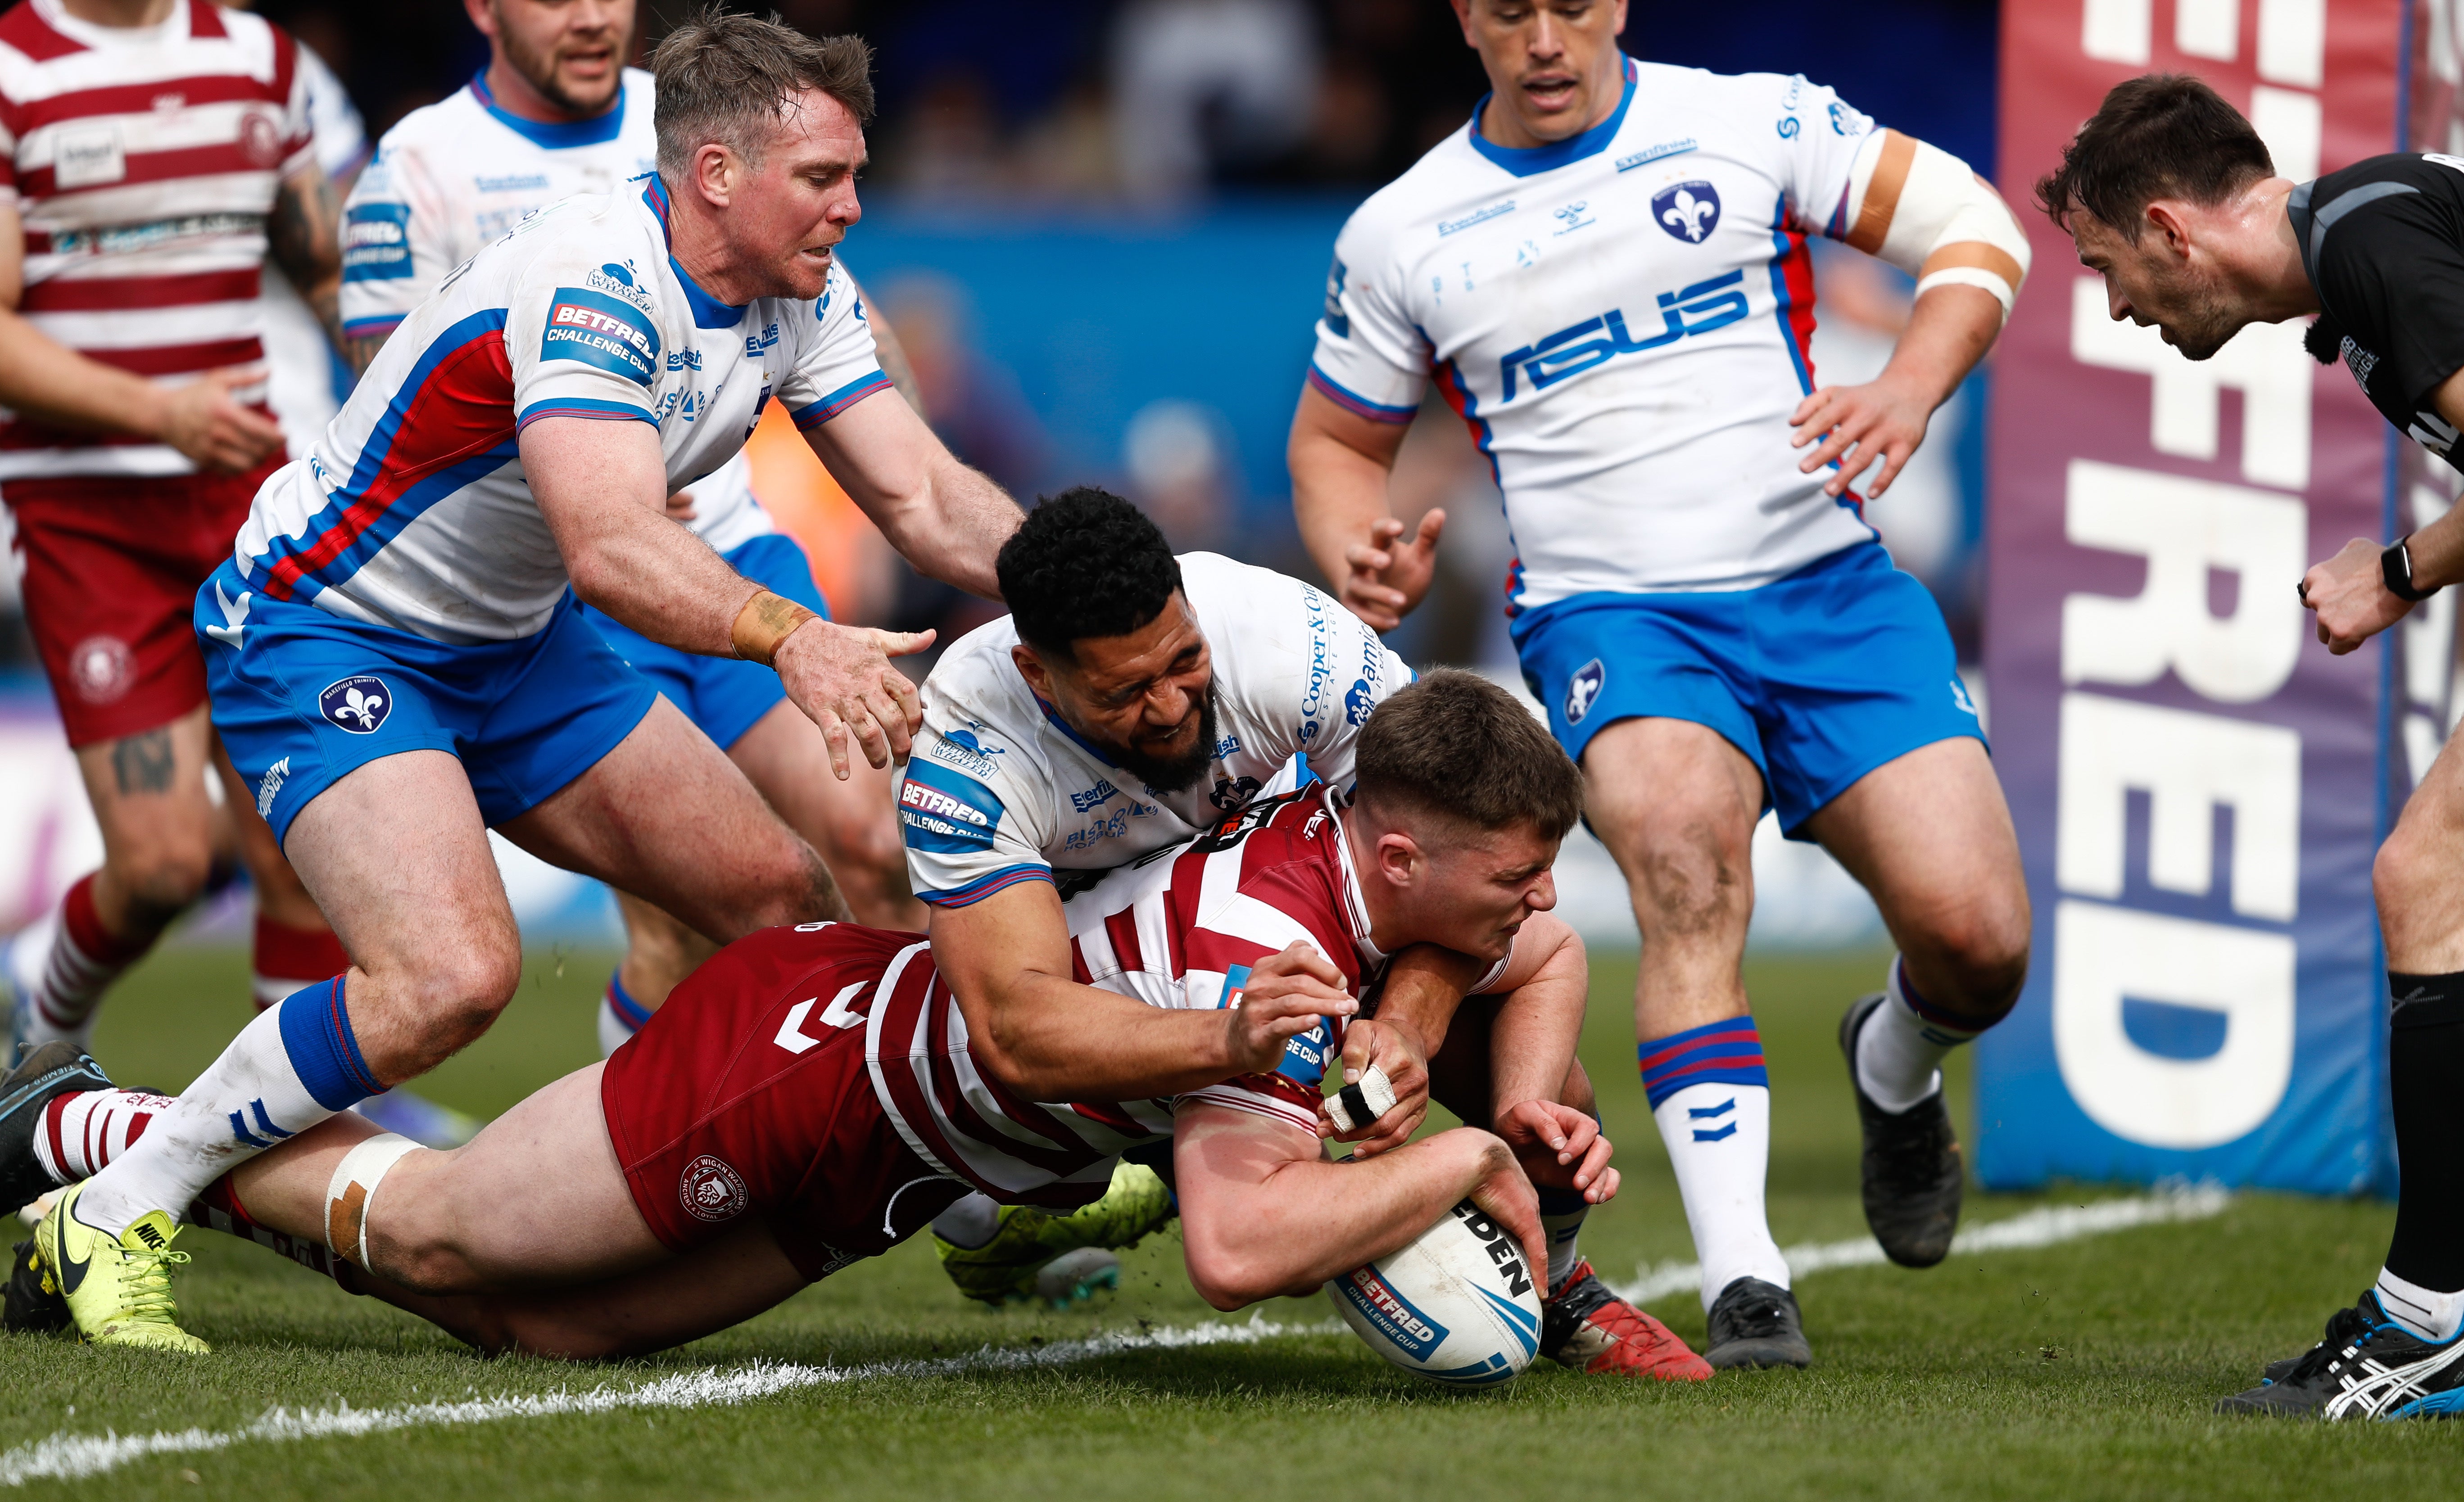 Ethan Havard dives in for a try during Wigan’s 36-6 Challenge Cup quarter-final win against Wakefield (Will Matthews/PA)